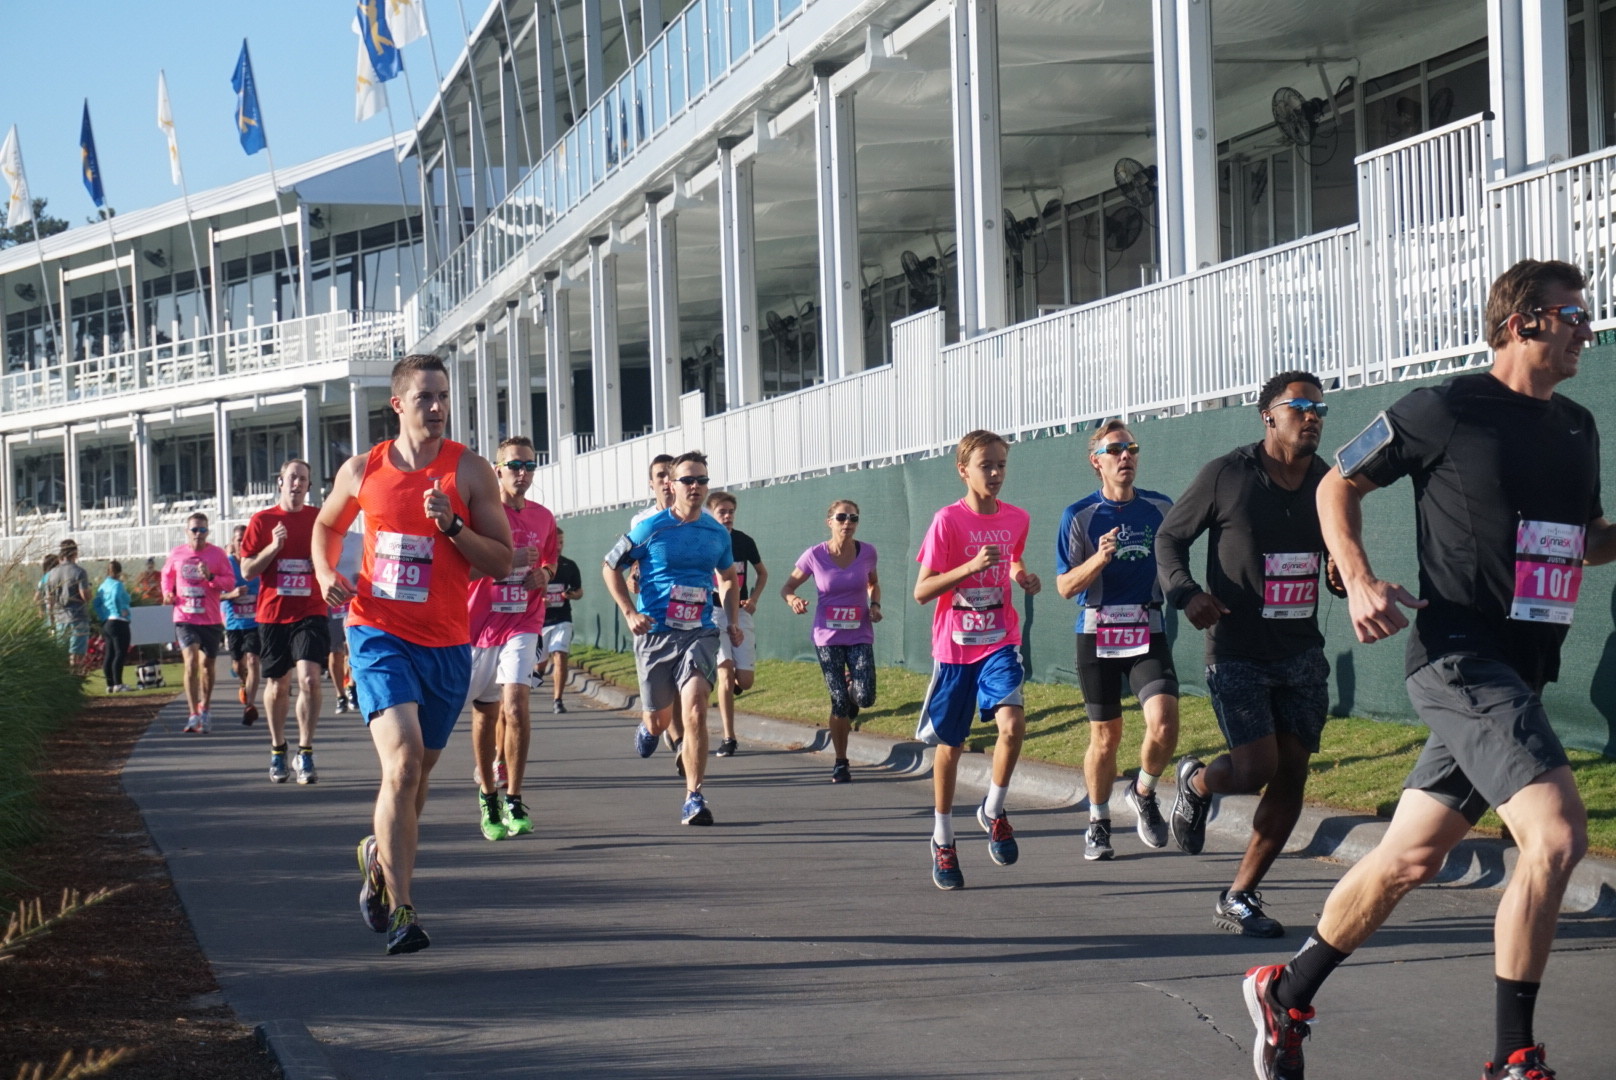 The first wave of participants in the PLAYERS Donna 5K races along the cart paths by the newly renovated double-decker hospitality buildings